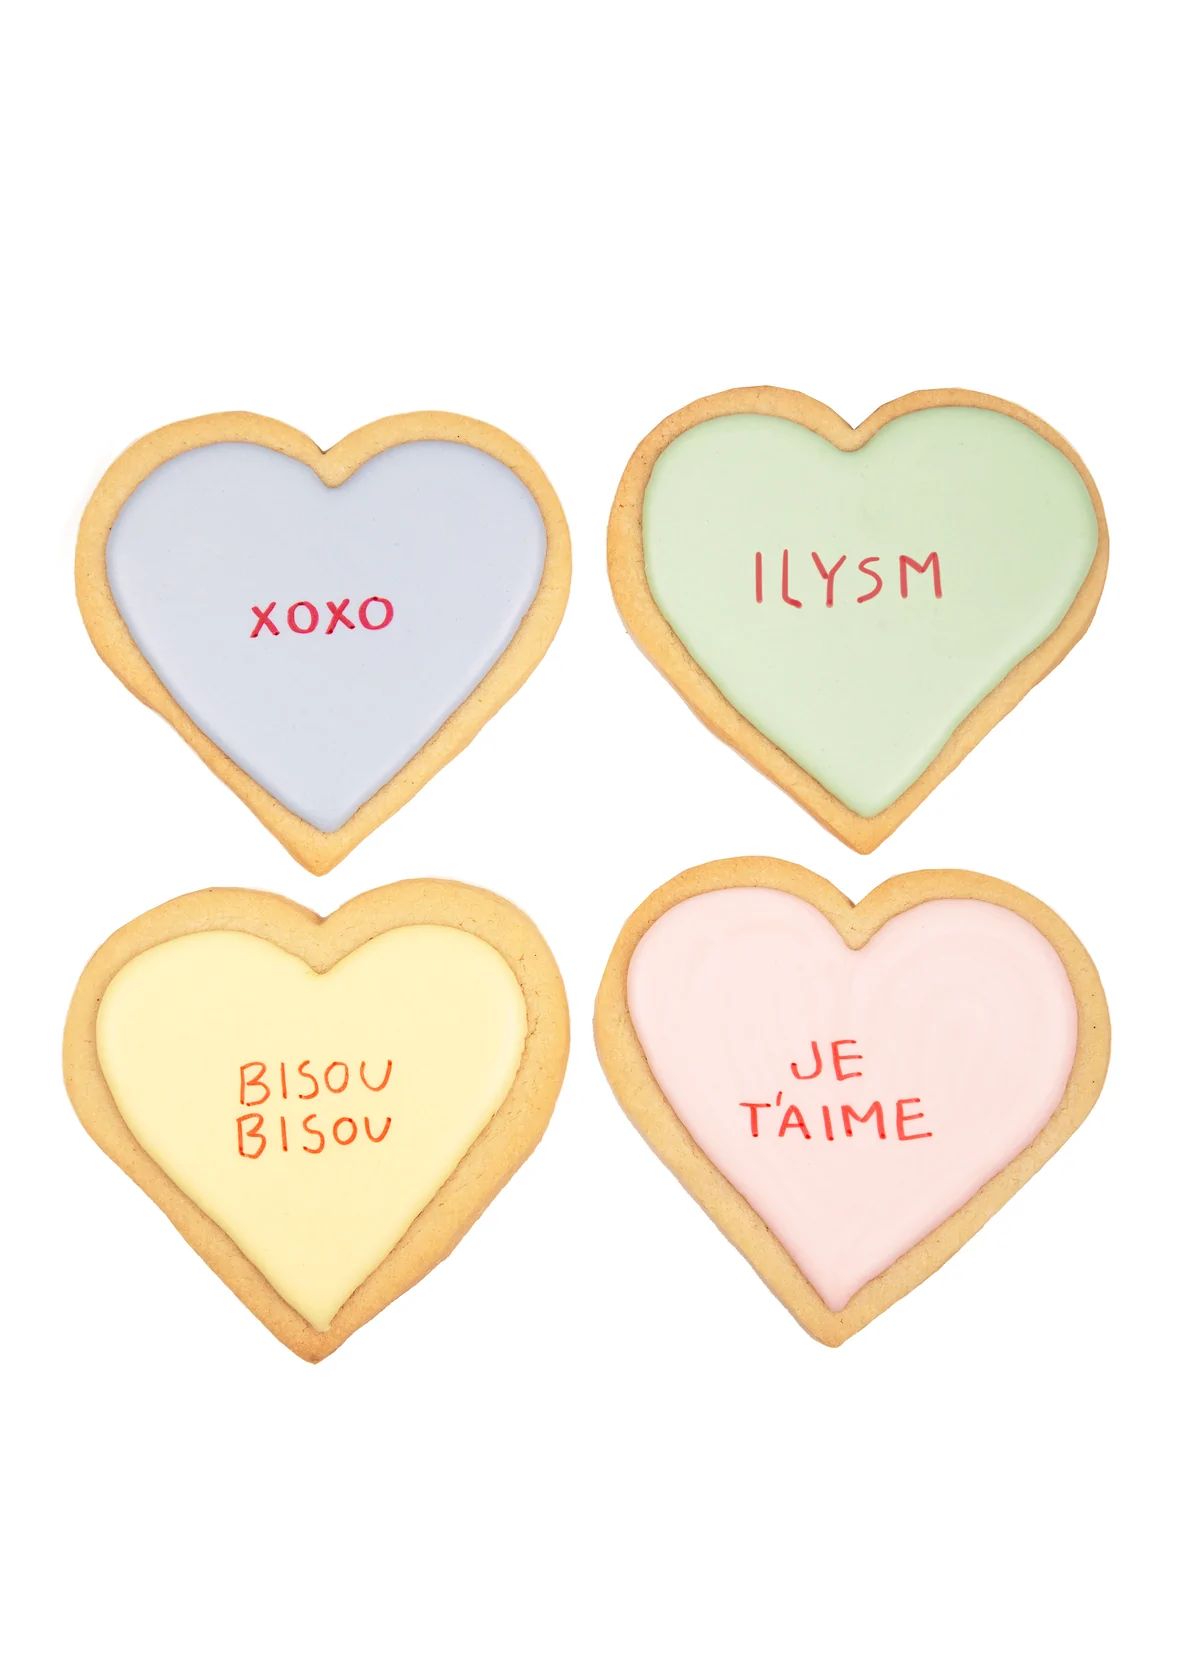 Conversation Heart Sugar Cookies, Set of 12 | Over The Moon